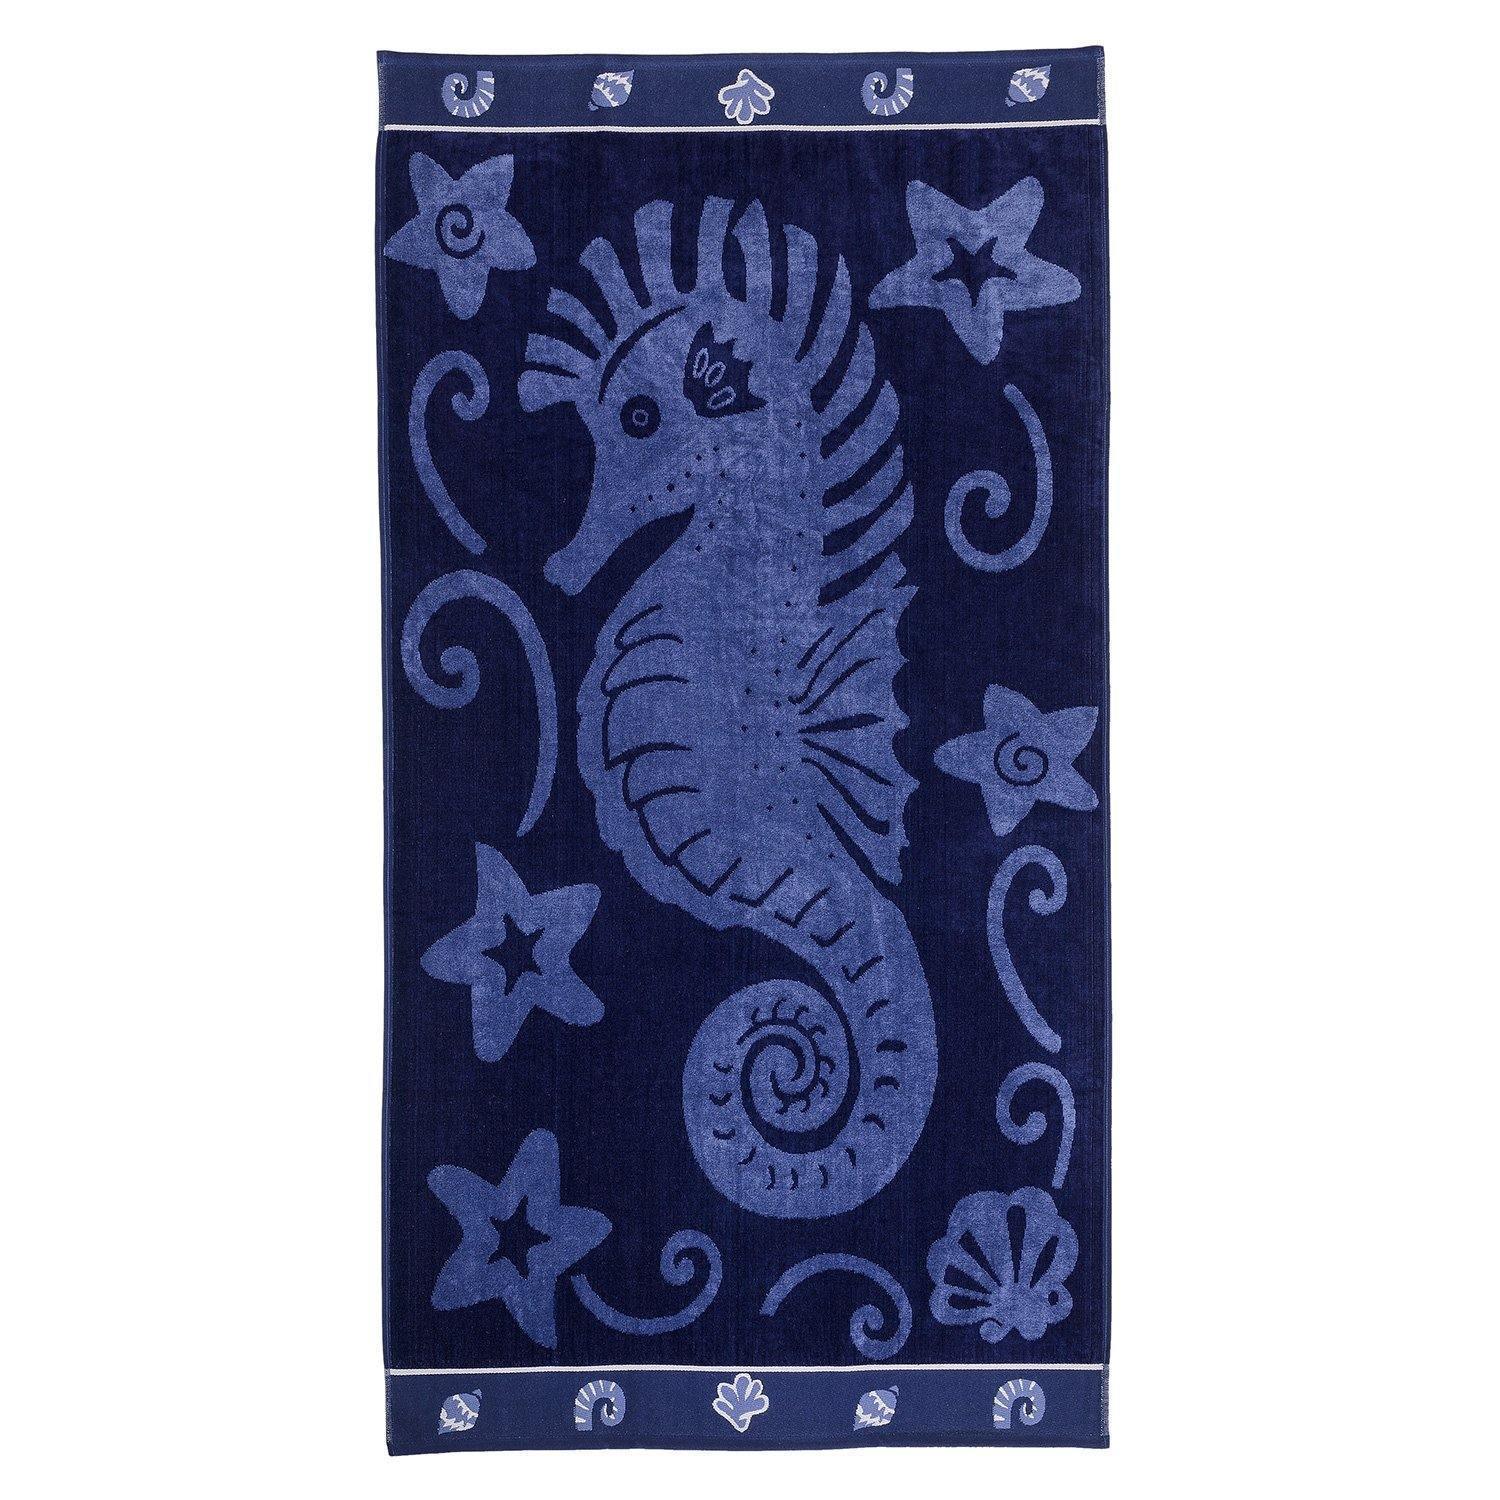 Sea Horse 100% Combed Cotton Oversized Beach Towel, Blue FredCo